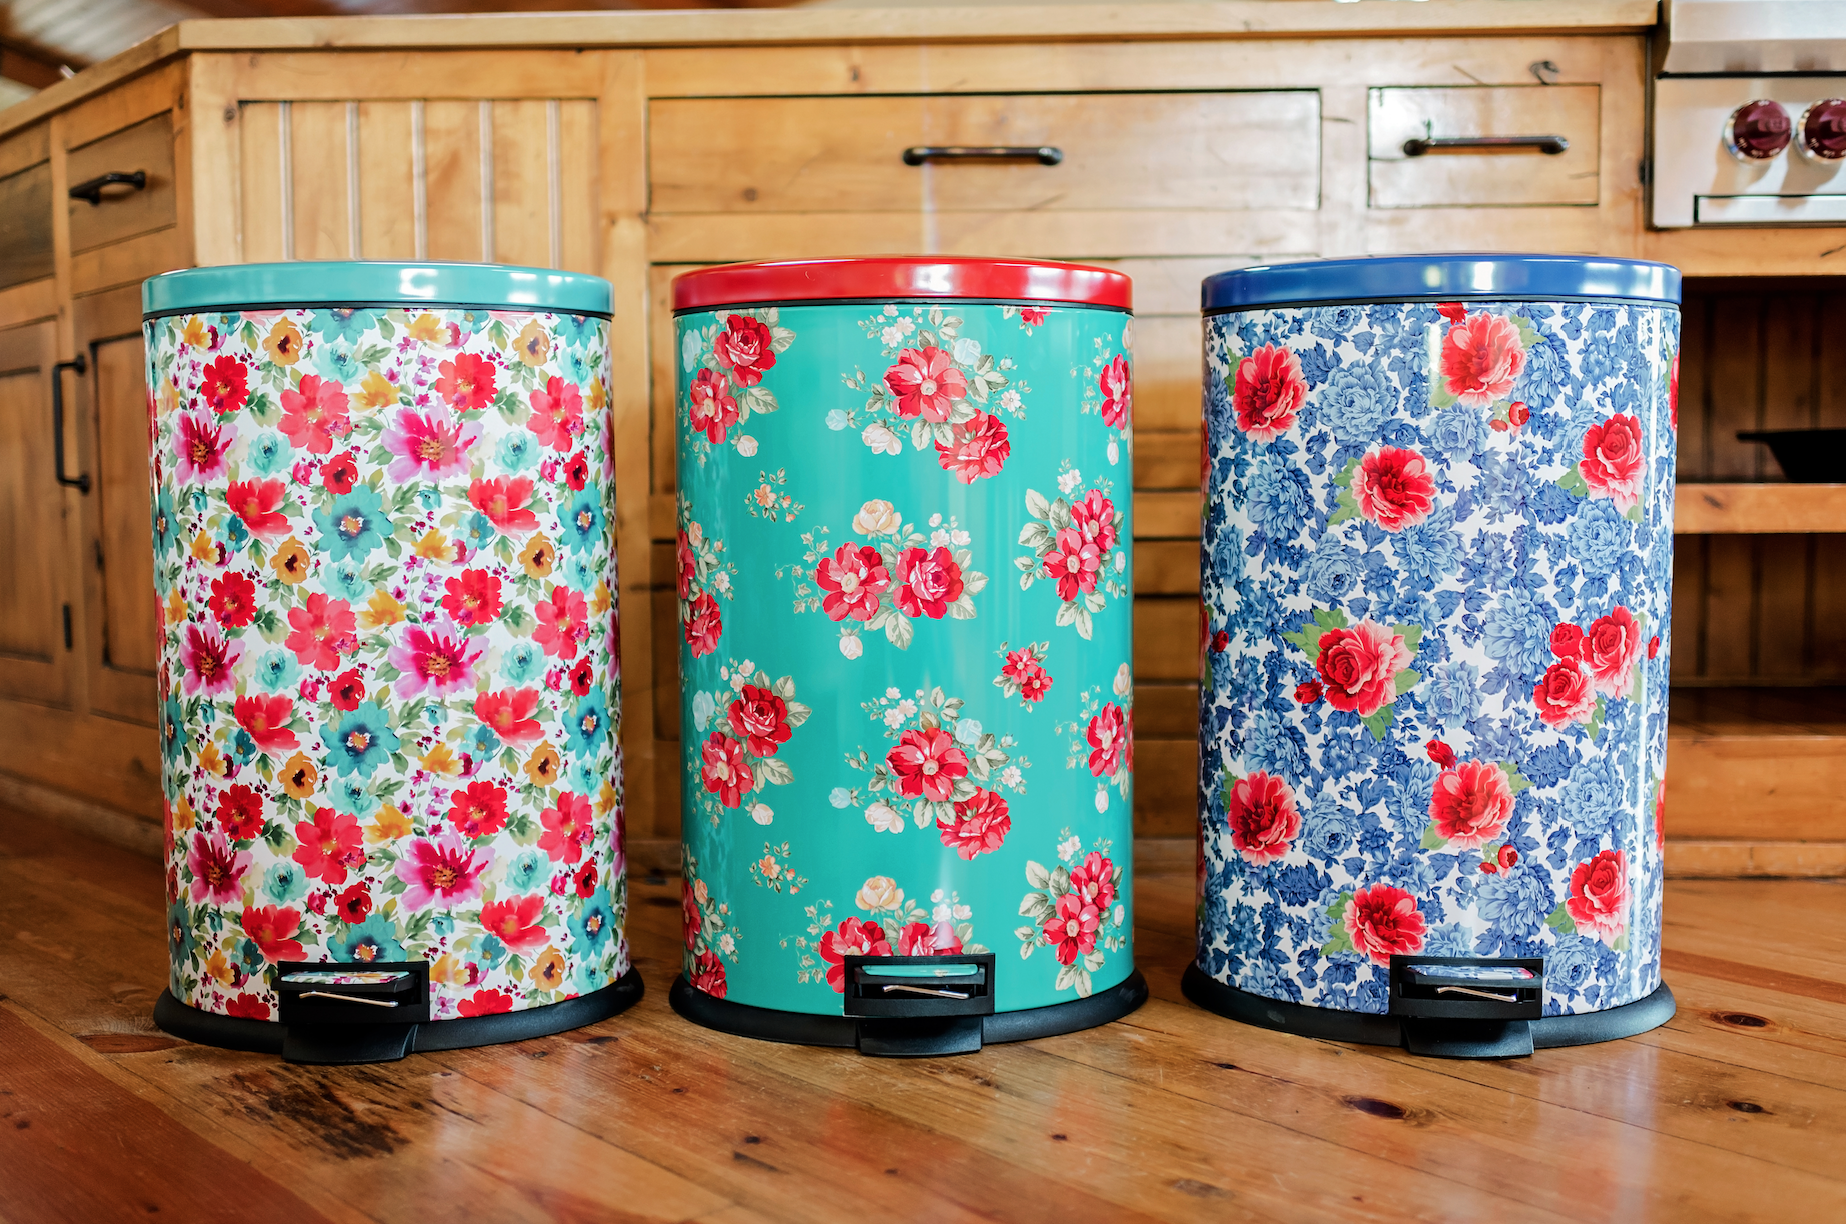 The Pioneer Woman Trash Cans - Ree Drummond Trash Cans at Walmart